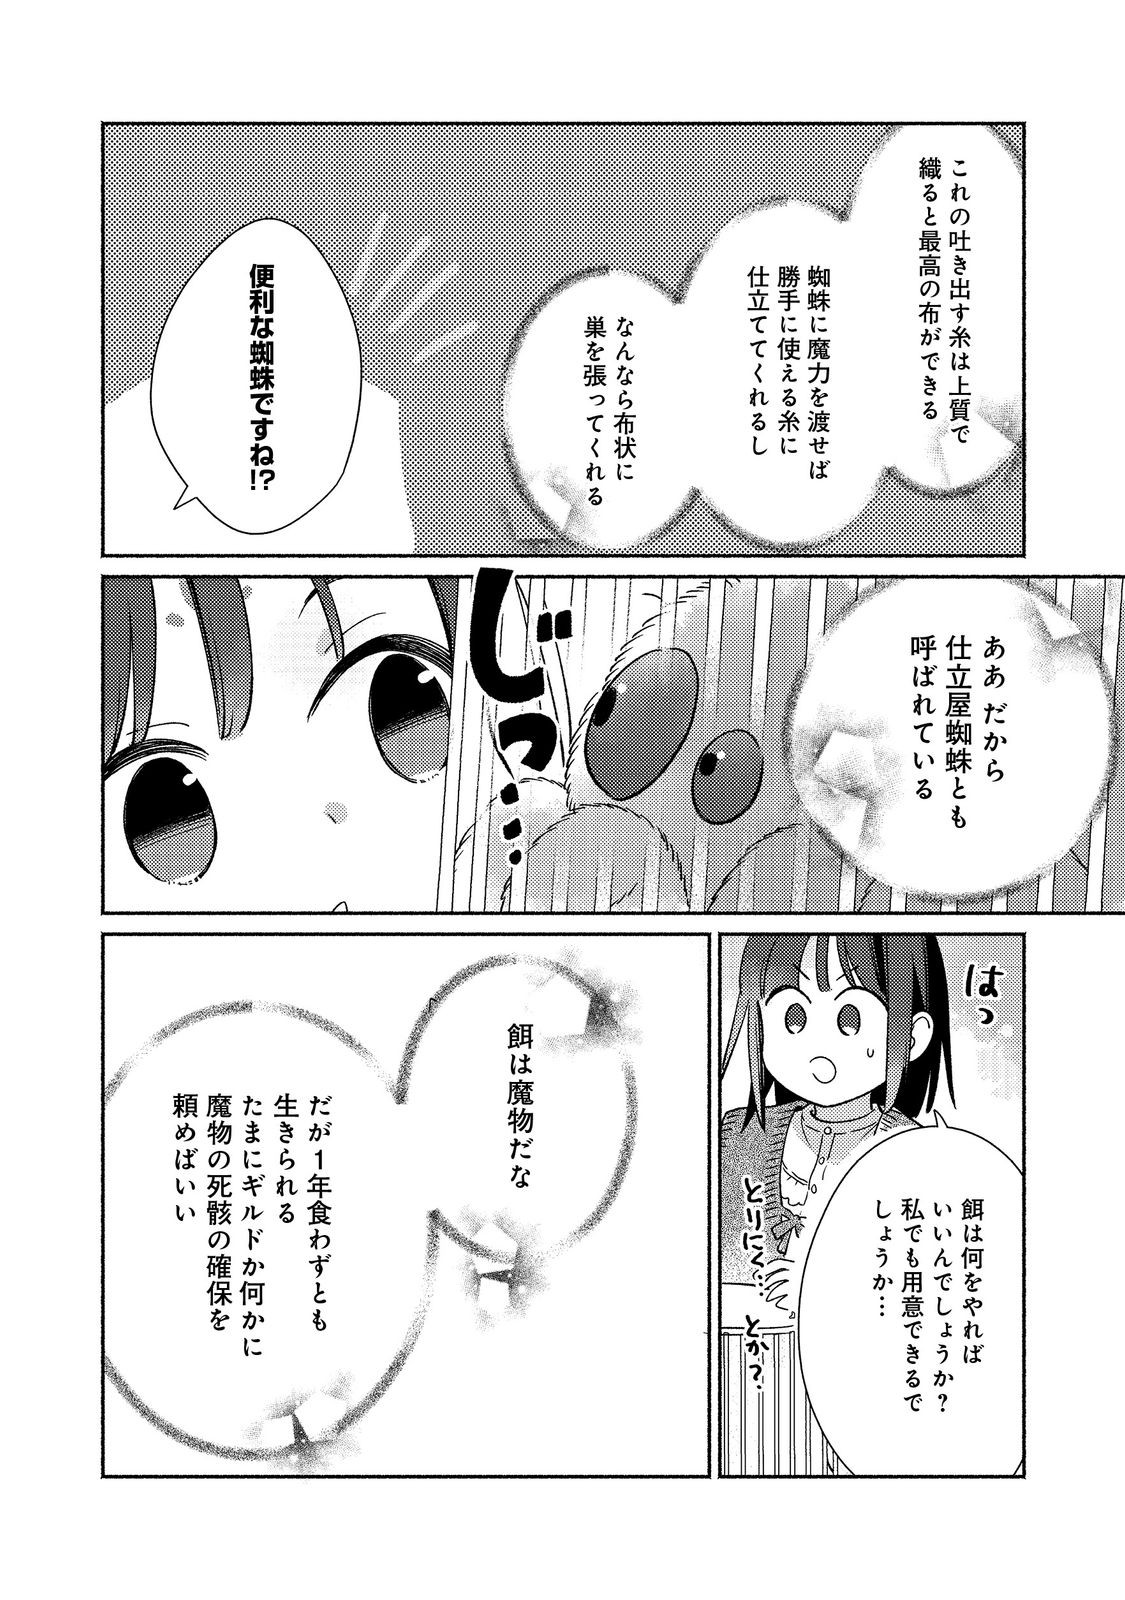 I’m the White Pig Nobleman 第26.2話 - Page 17